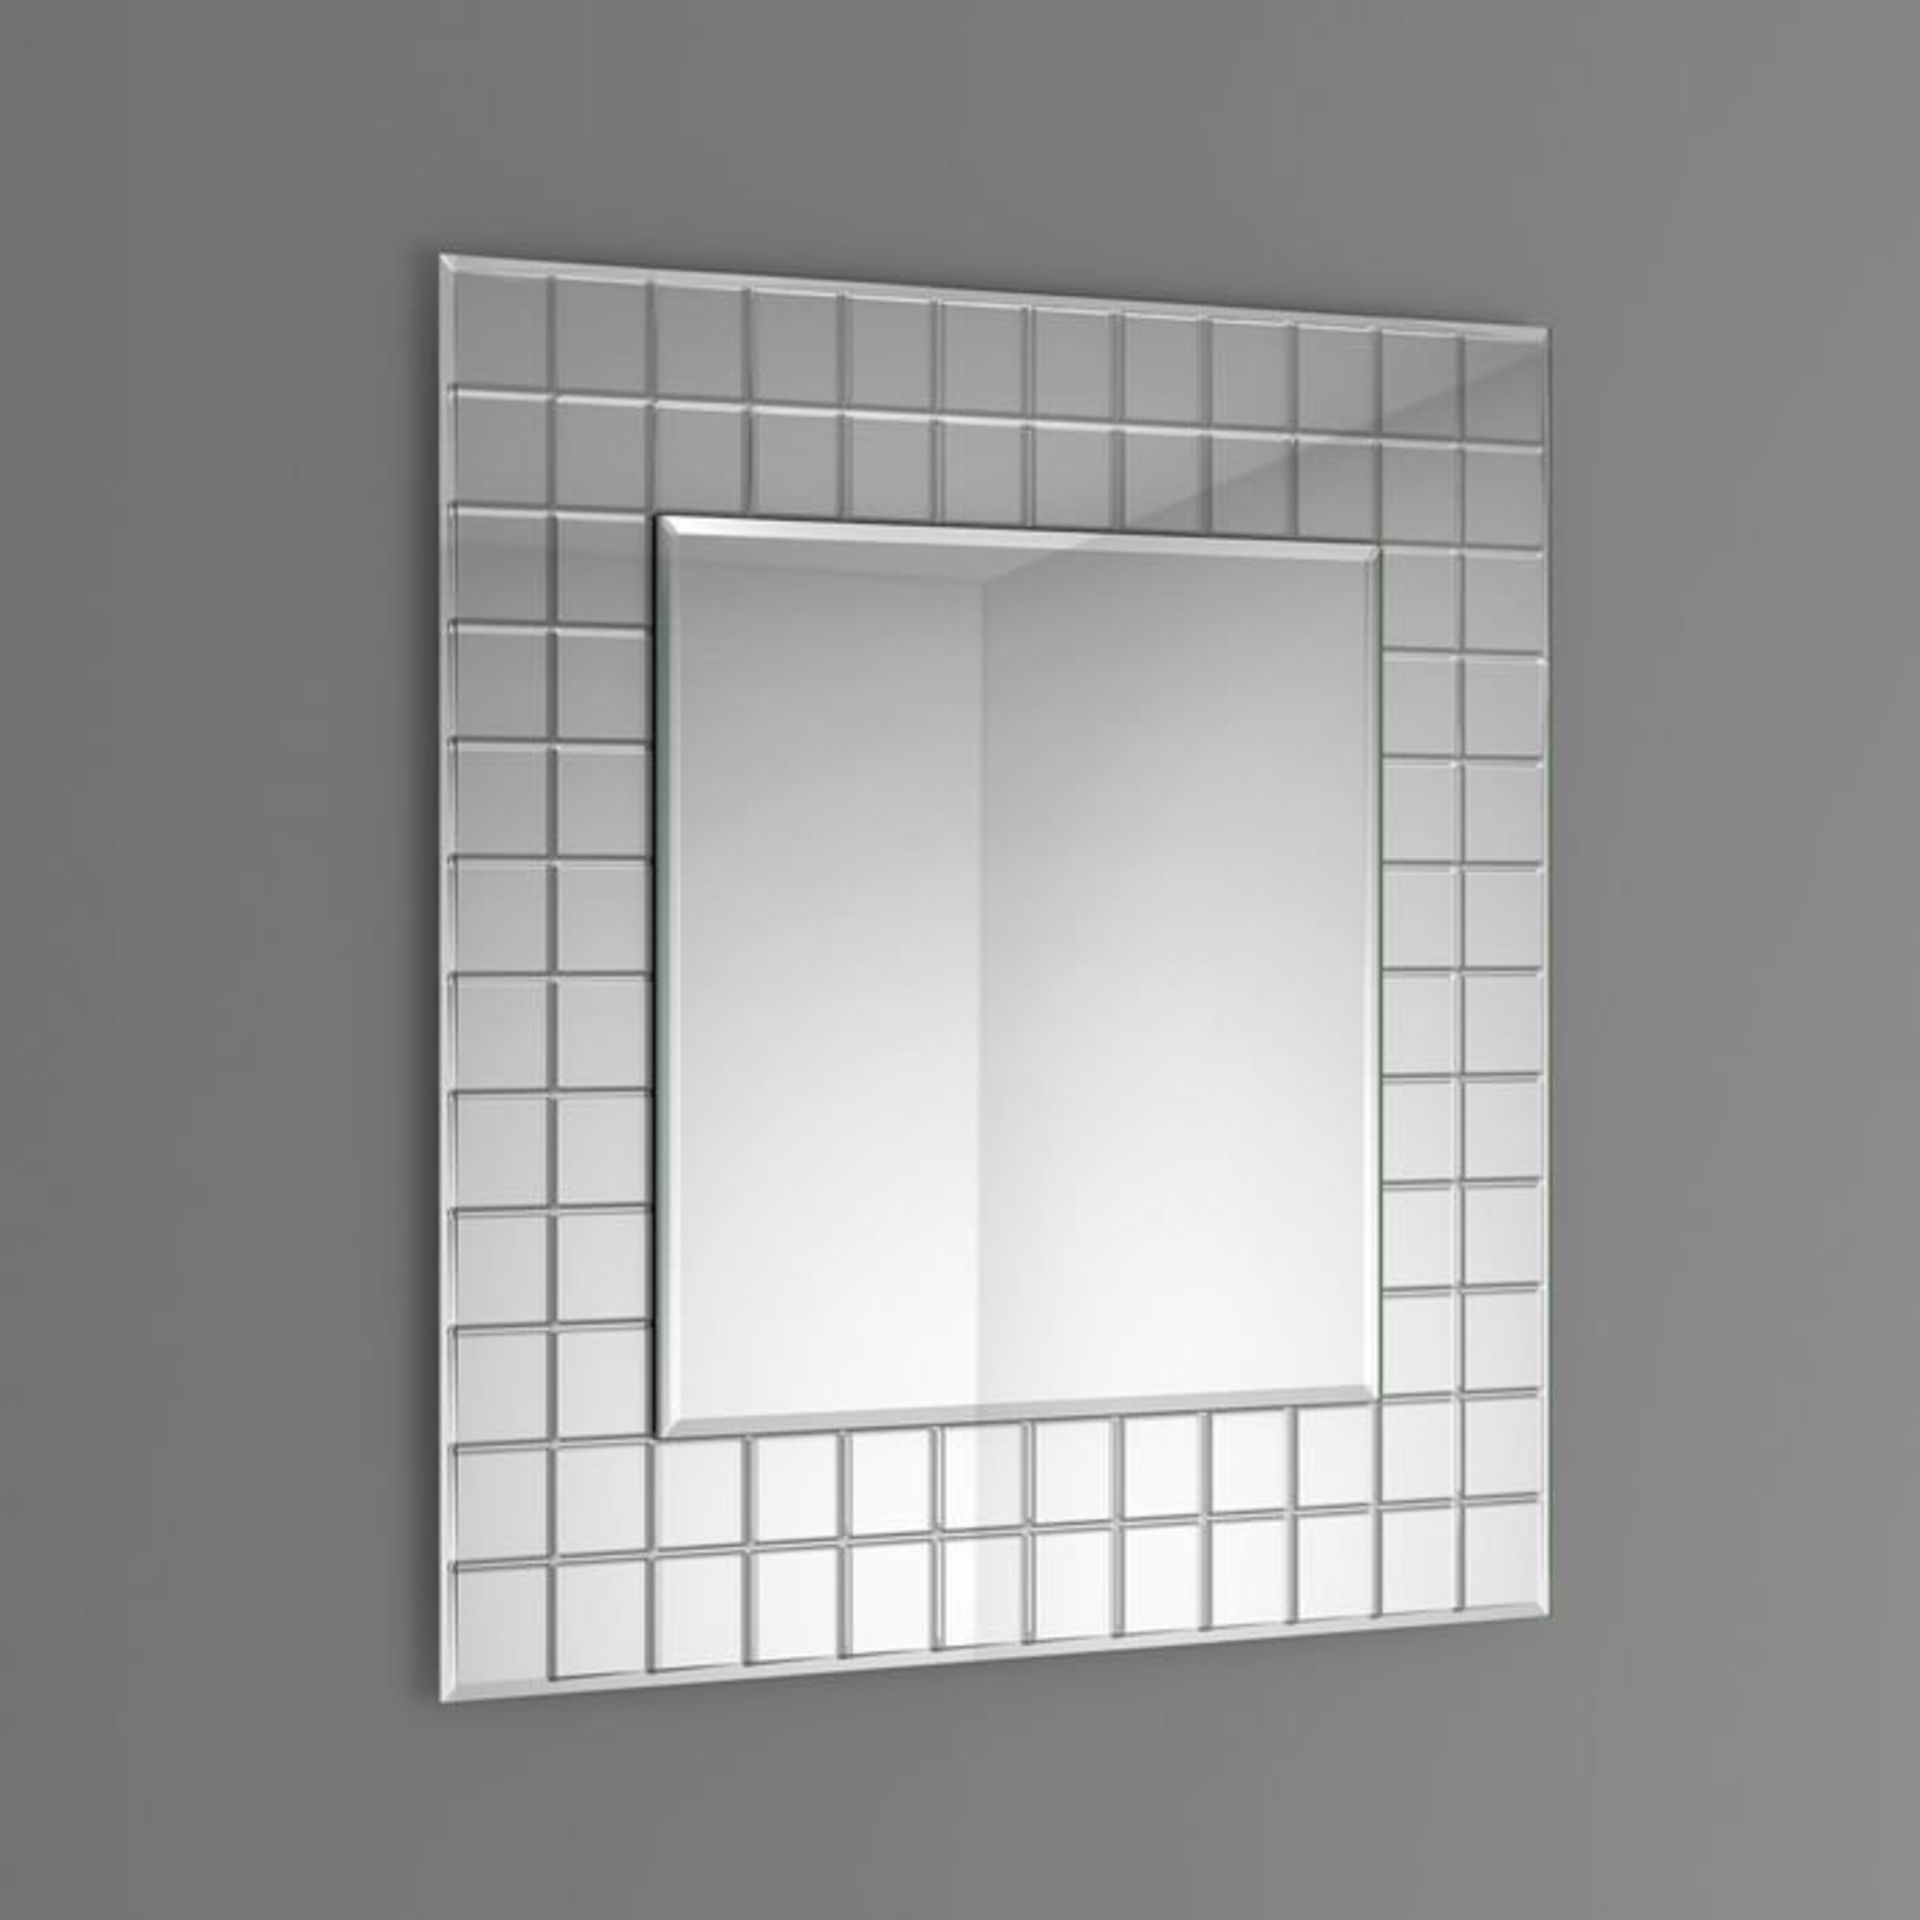 (H198) 600x600mm Mosaic Mirror. Decorative edge makes for glamourous viewing Supplied fully - Bild 4 aus 5